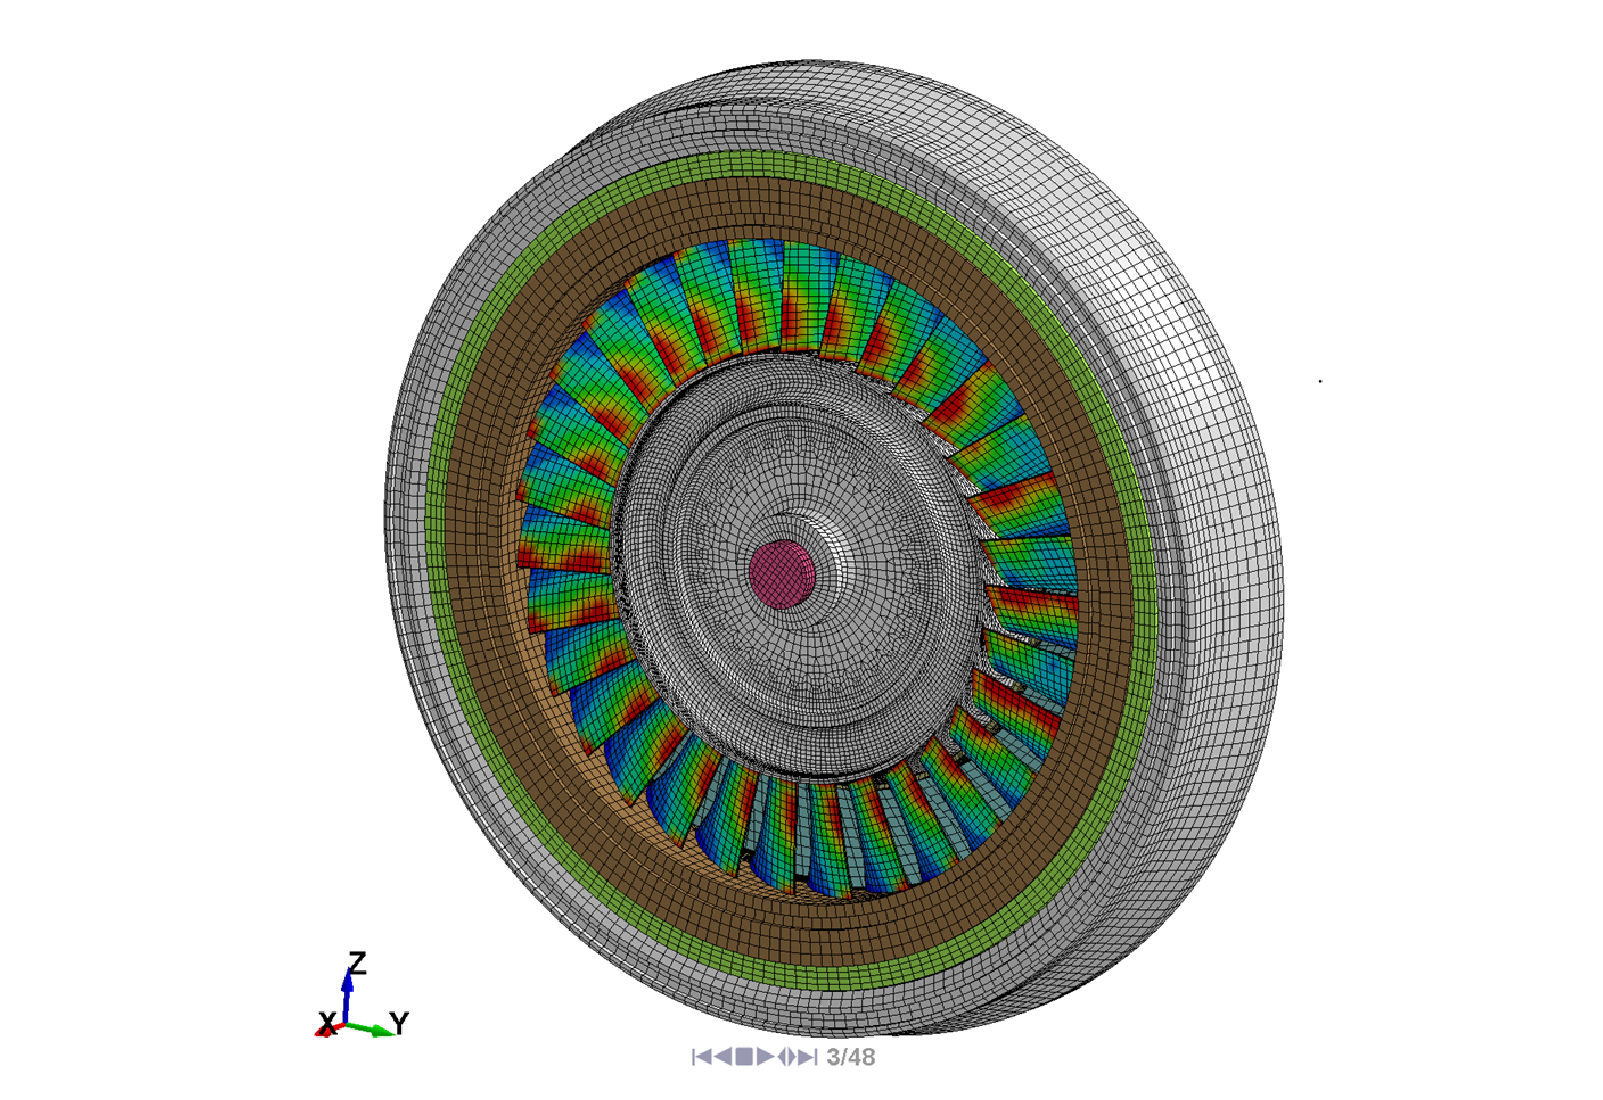 Figure 3: Implicit spin-up is used to set the stress state in the turbine blade prior to the burst simulation or fusing of the disk.